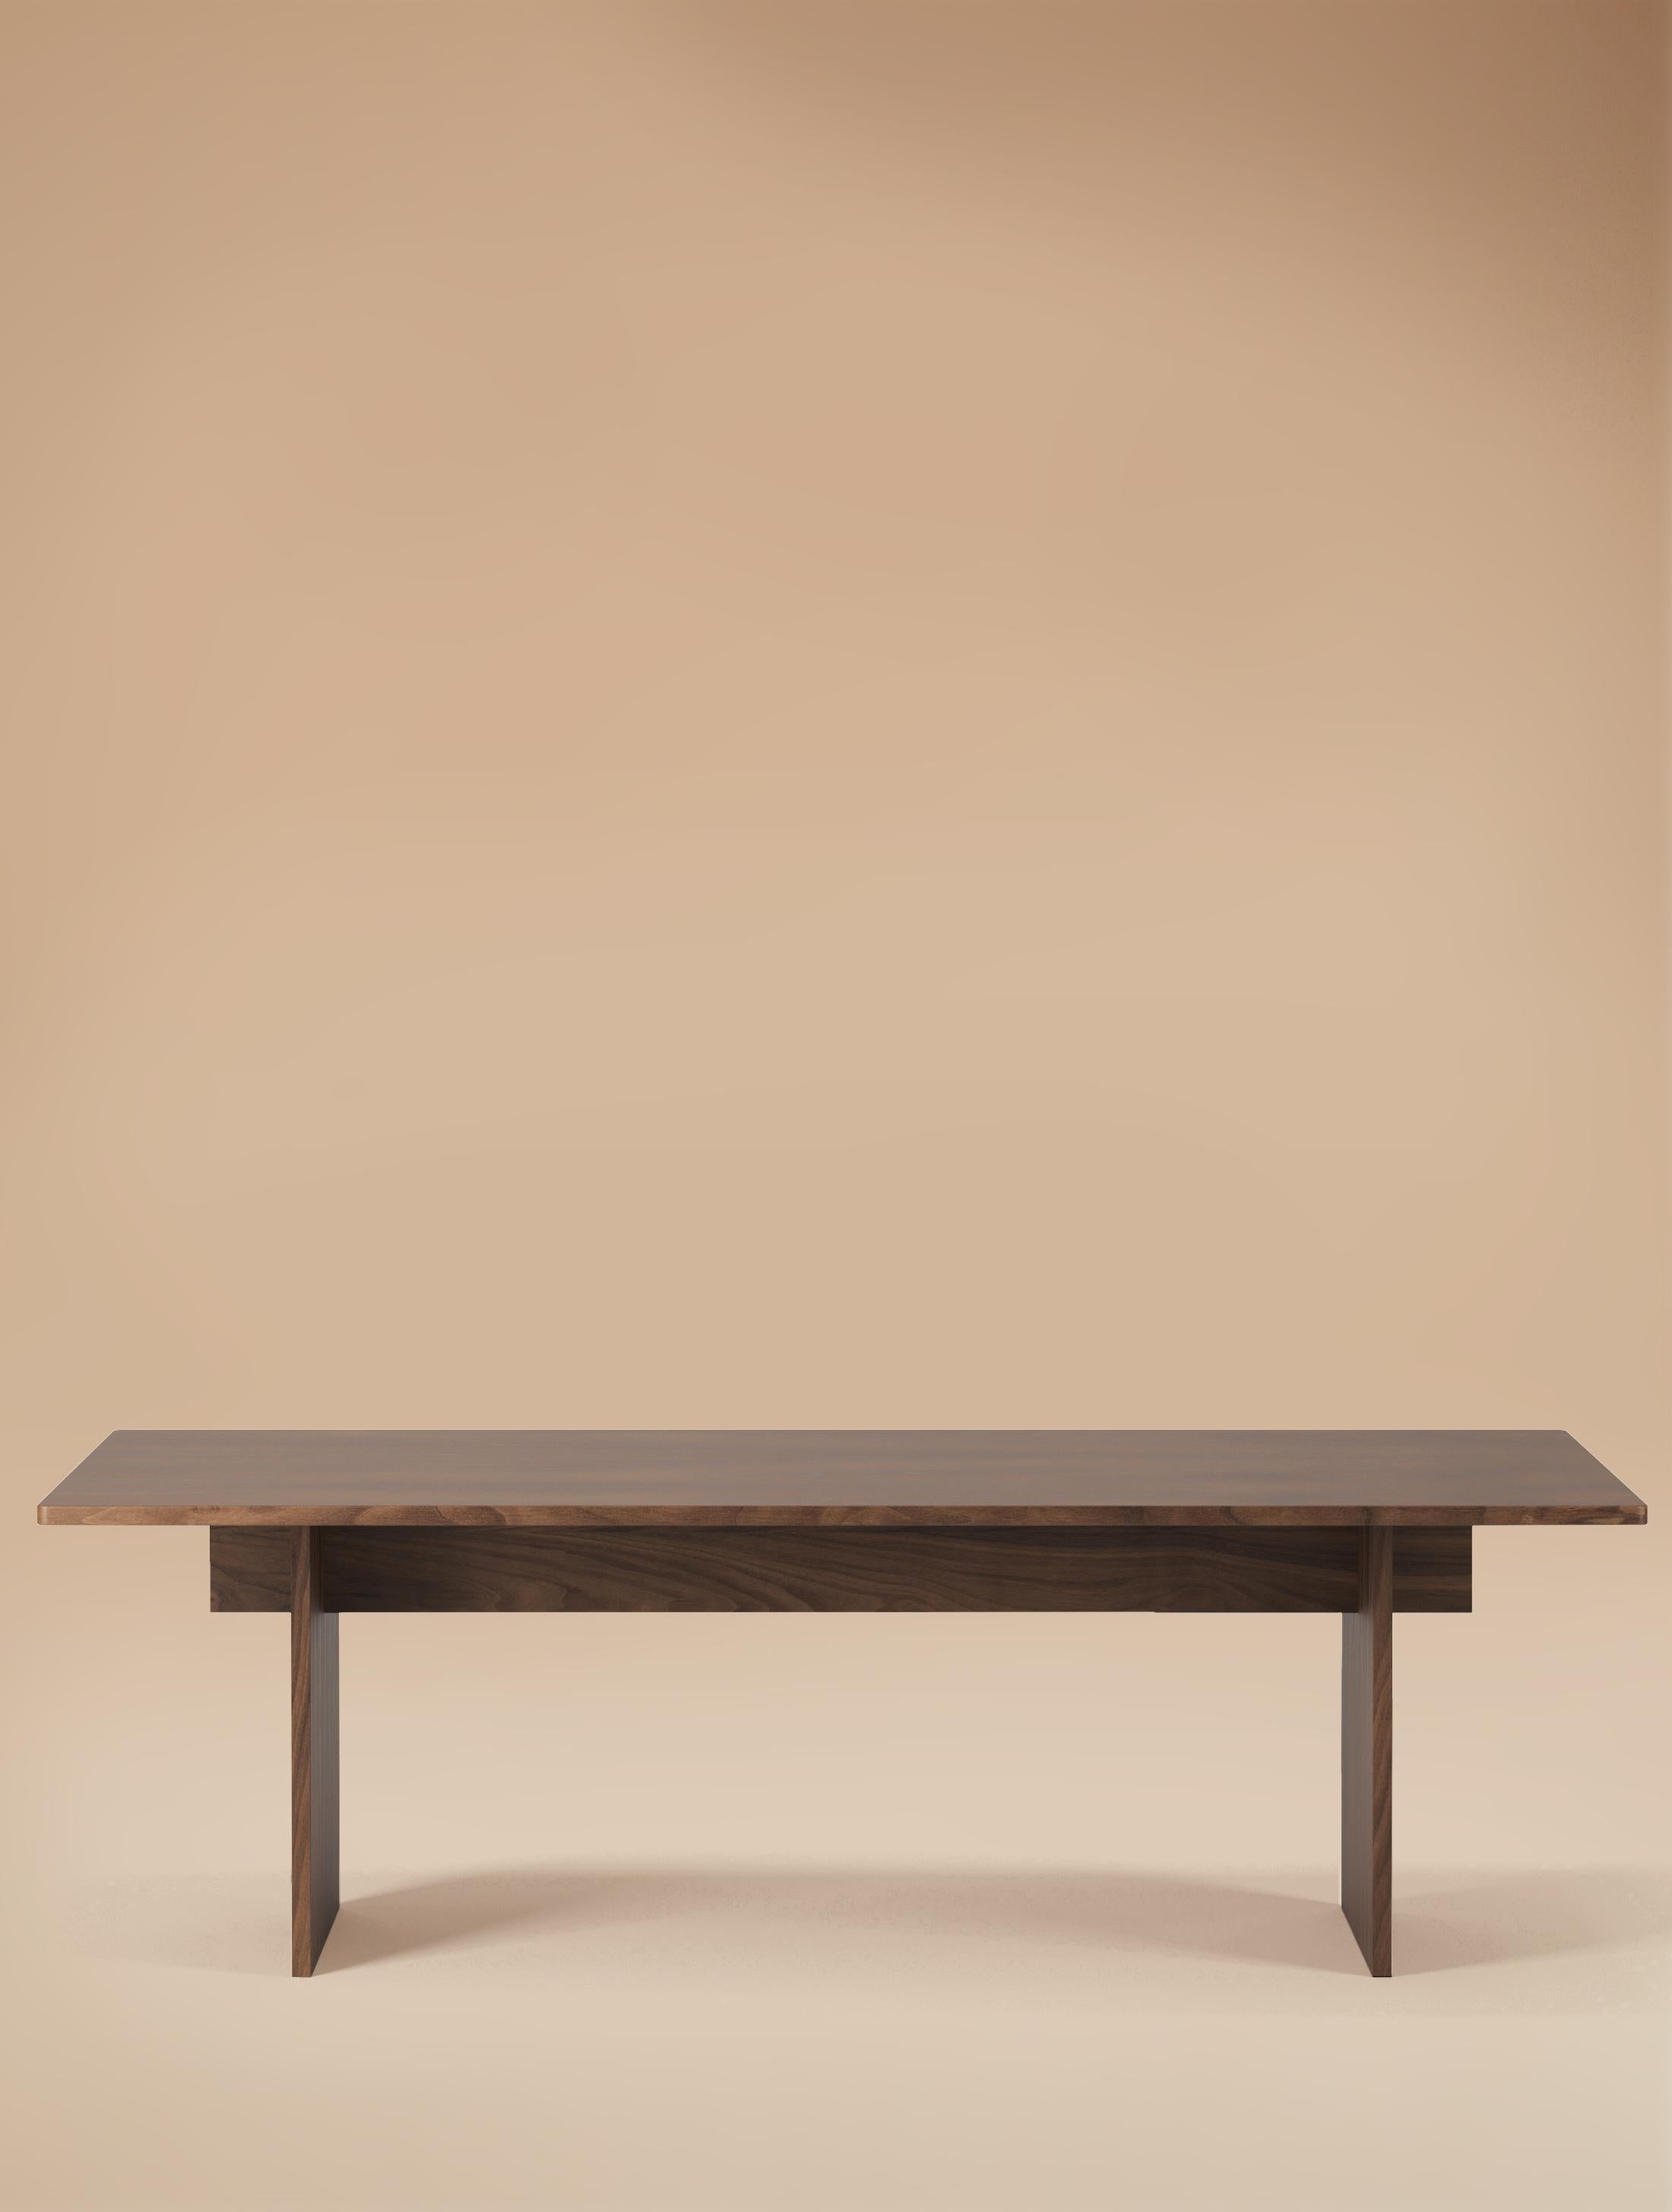 8 Seater Faure Table Handcrafted in Oak  by Kevin Frankental 7